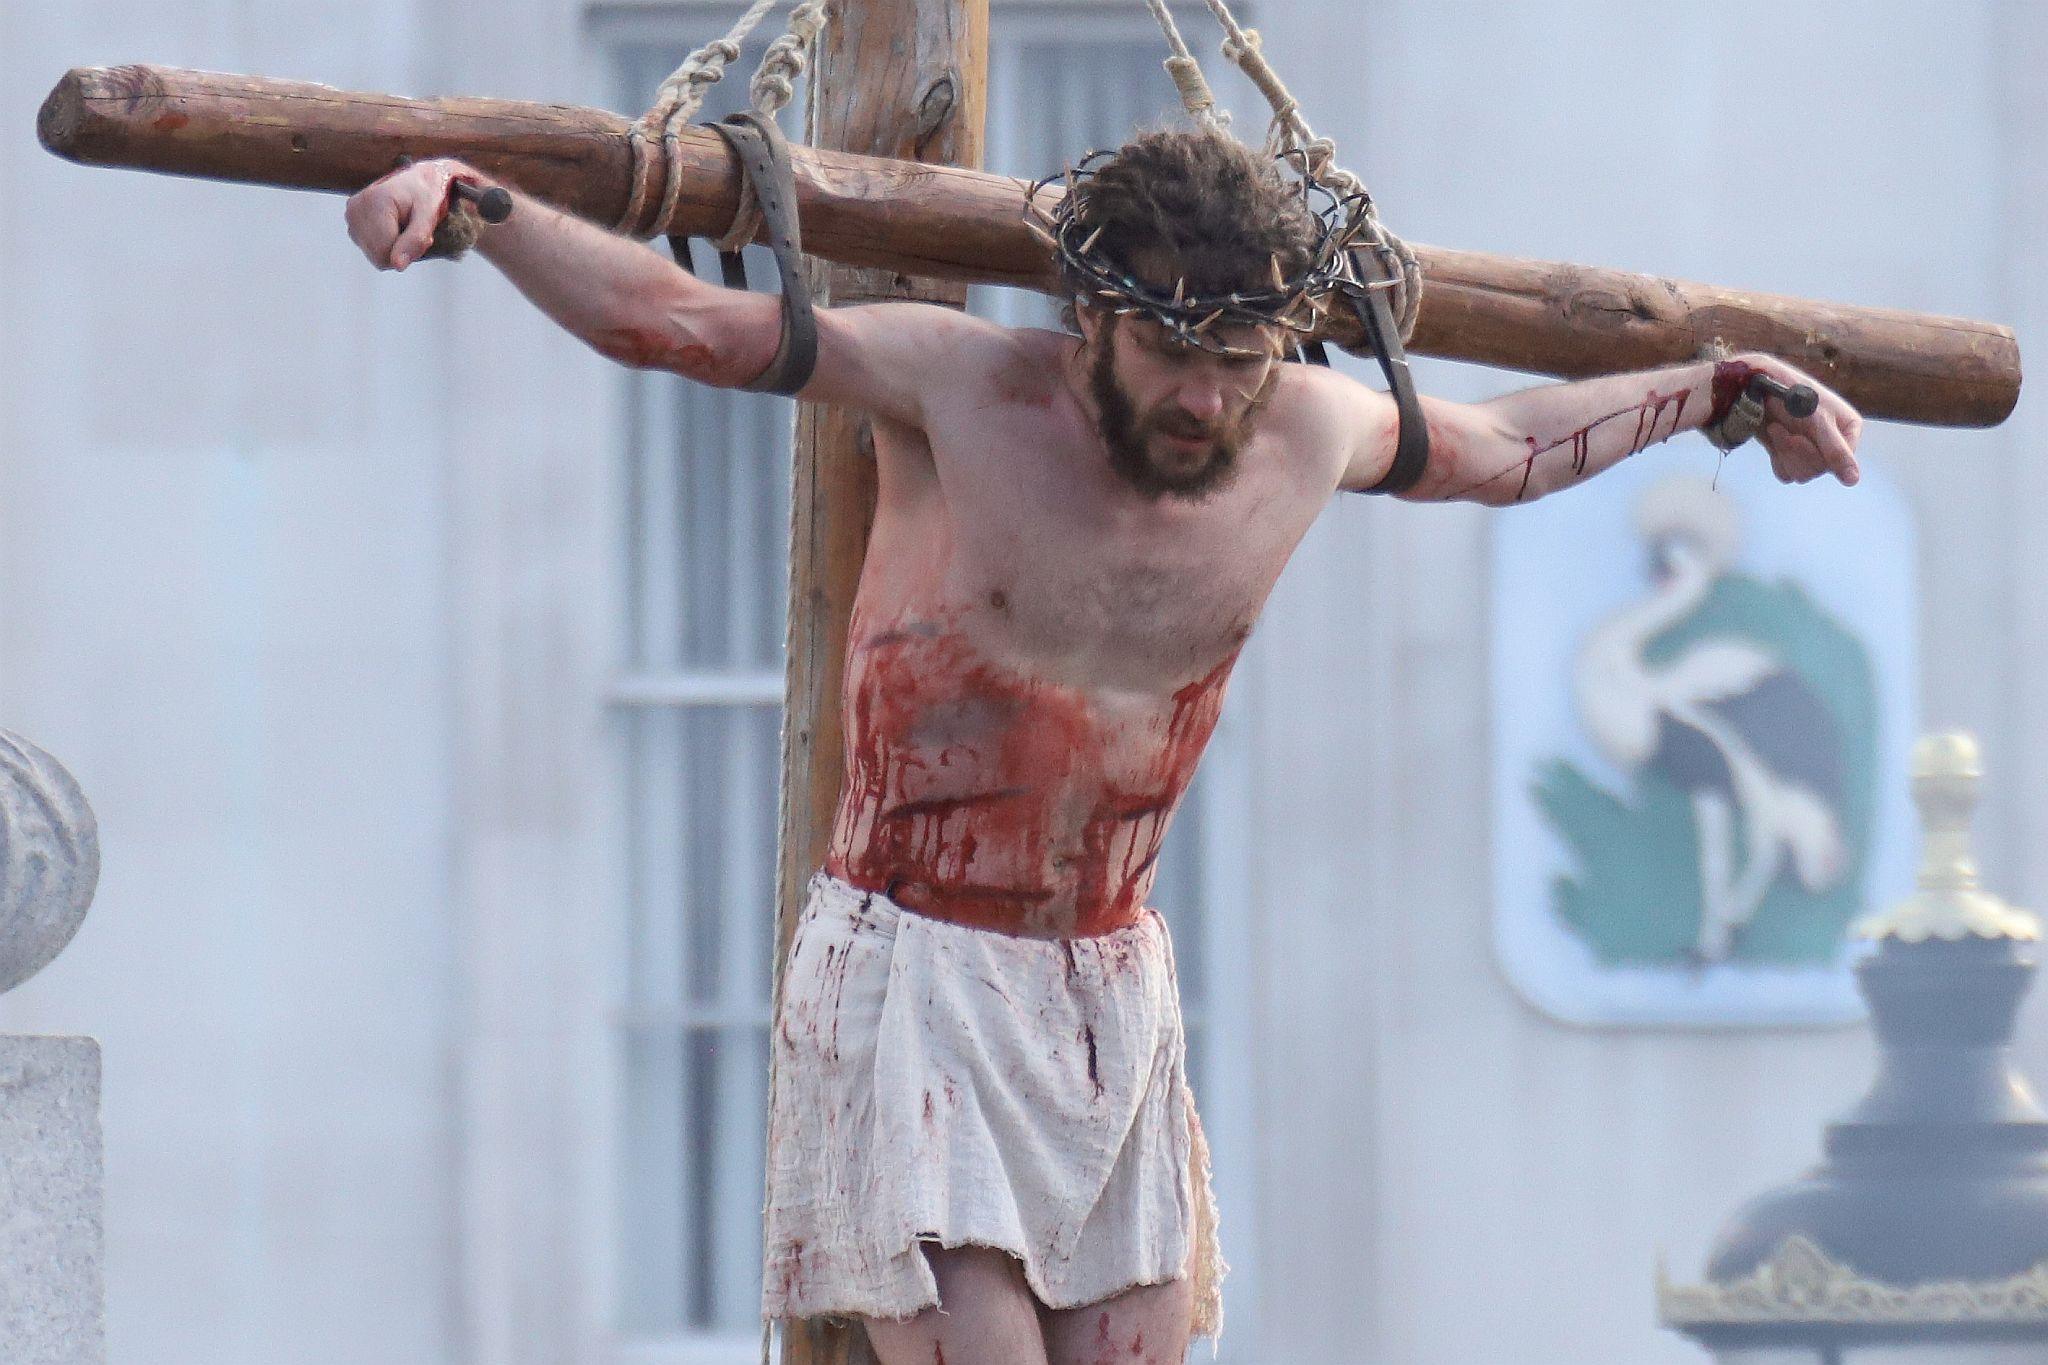 The Good Friday Wintershall Easter Passion Play "The Passion of Jesus" presented at Trafalgar Square in London. 7th April 2023. Christ on the Cross.